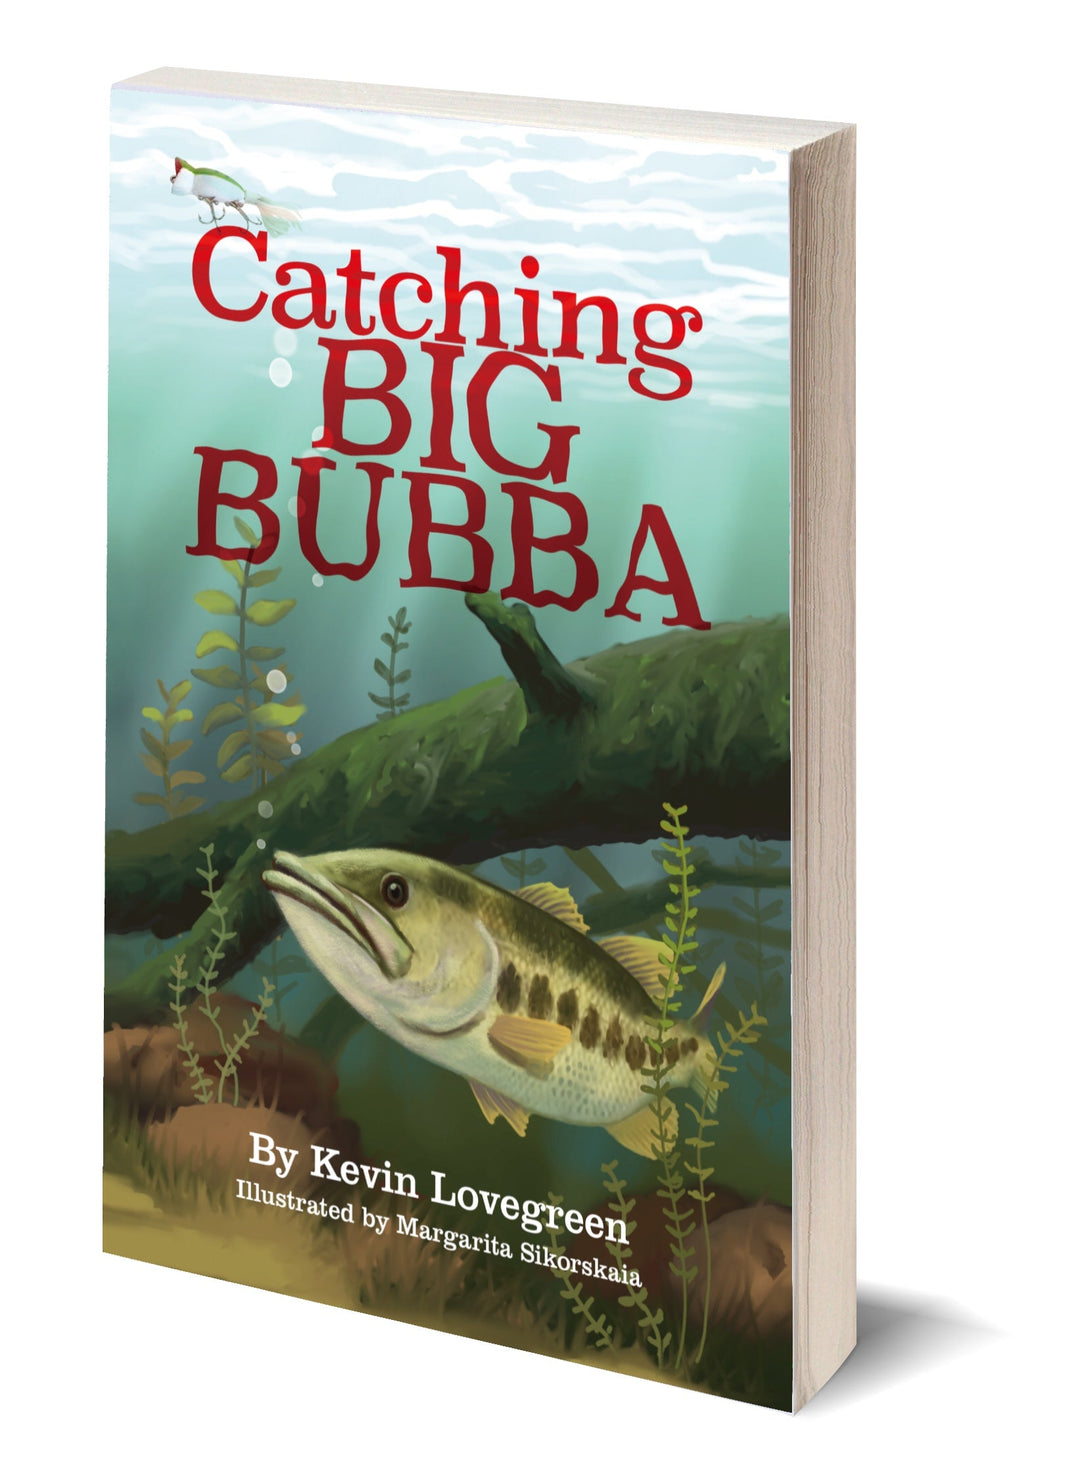 Catching Big Bubba (New Release)